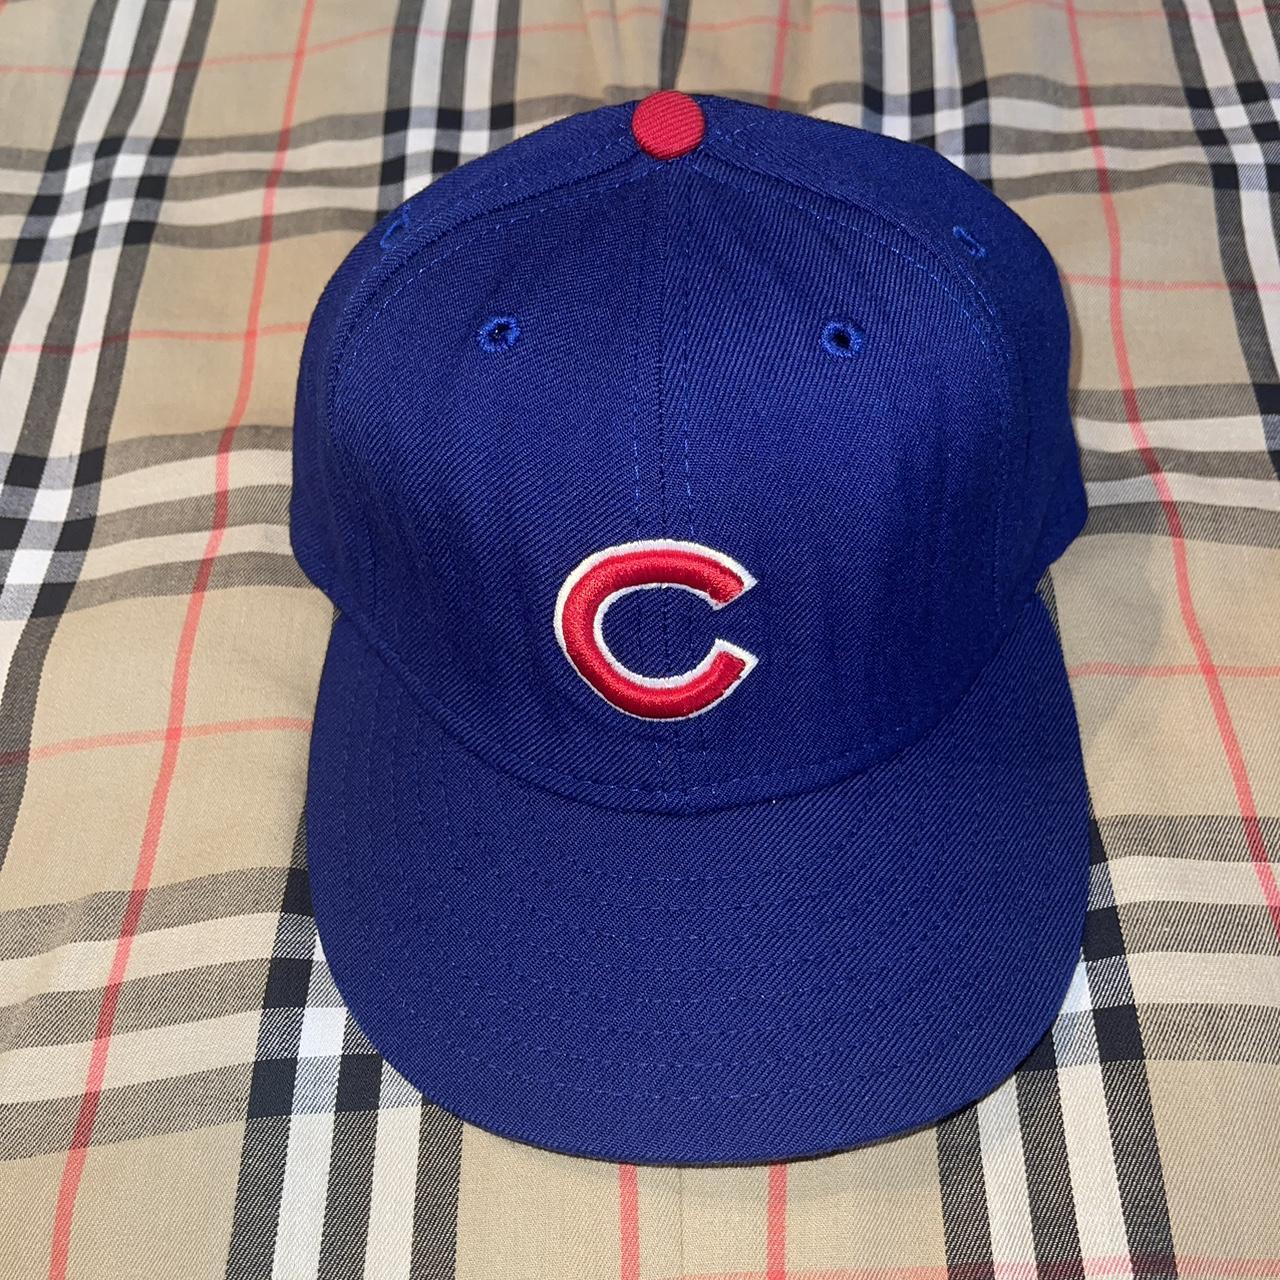 Vintage New Era Chicago Cubs fitted hat 7 1/4 with a